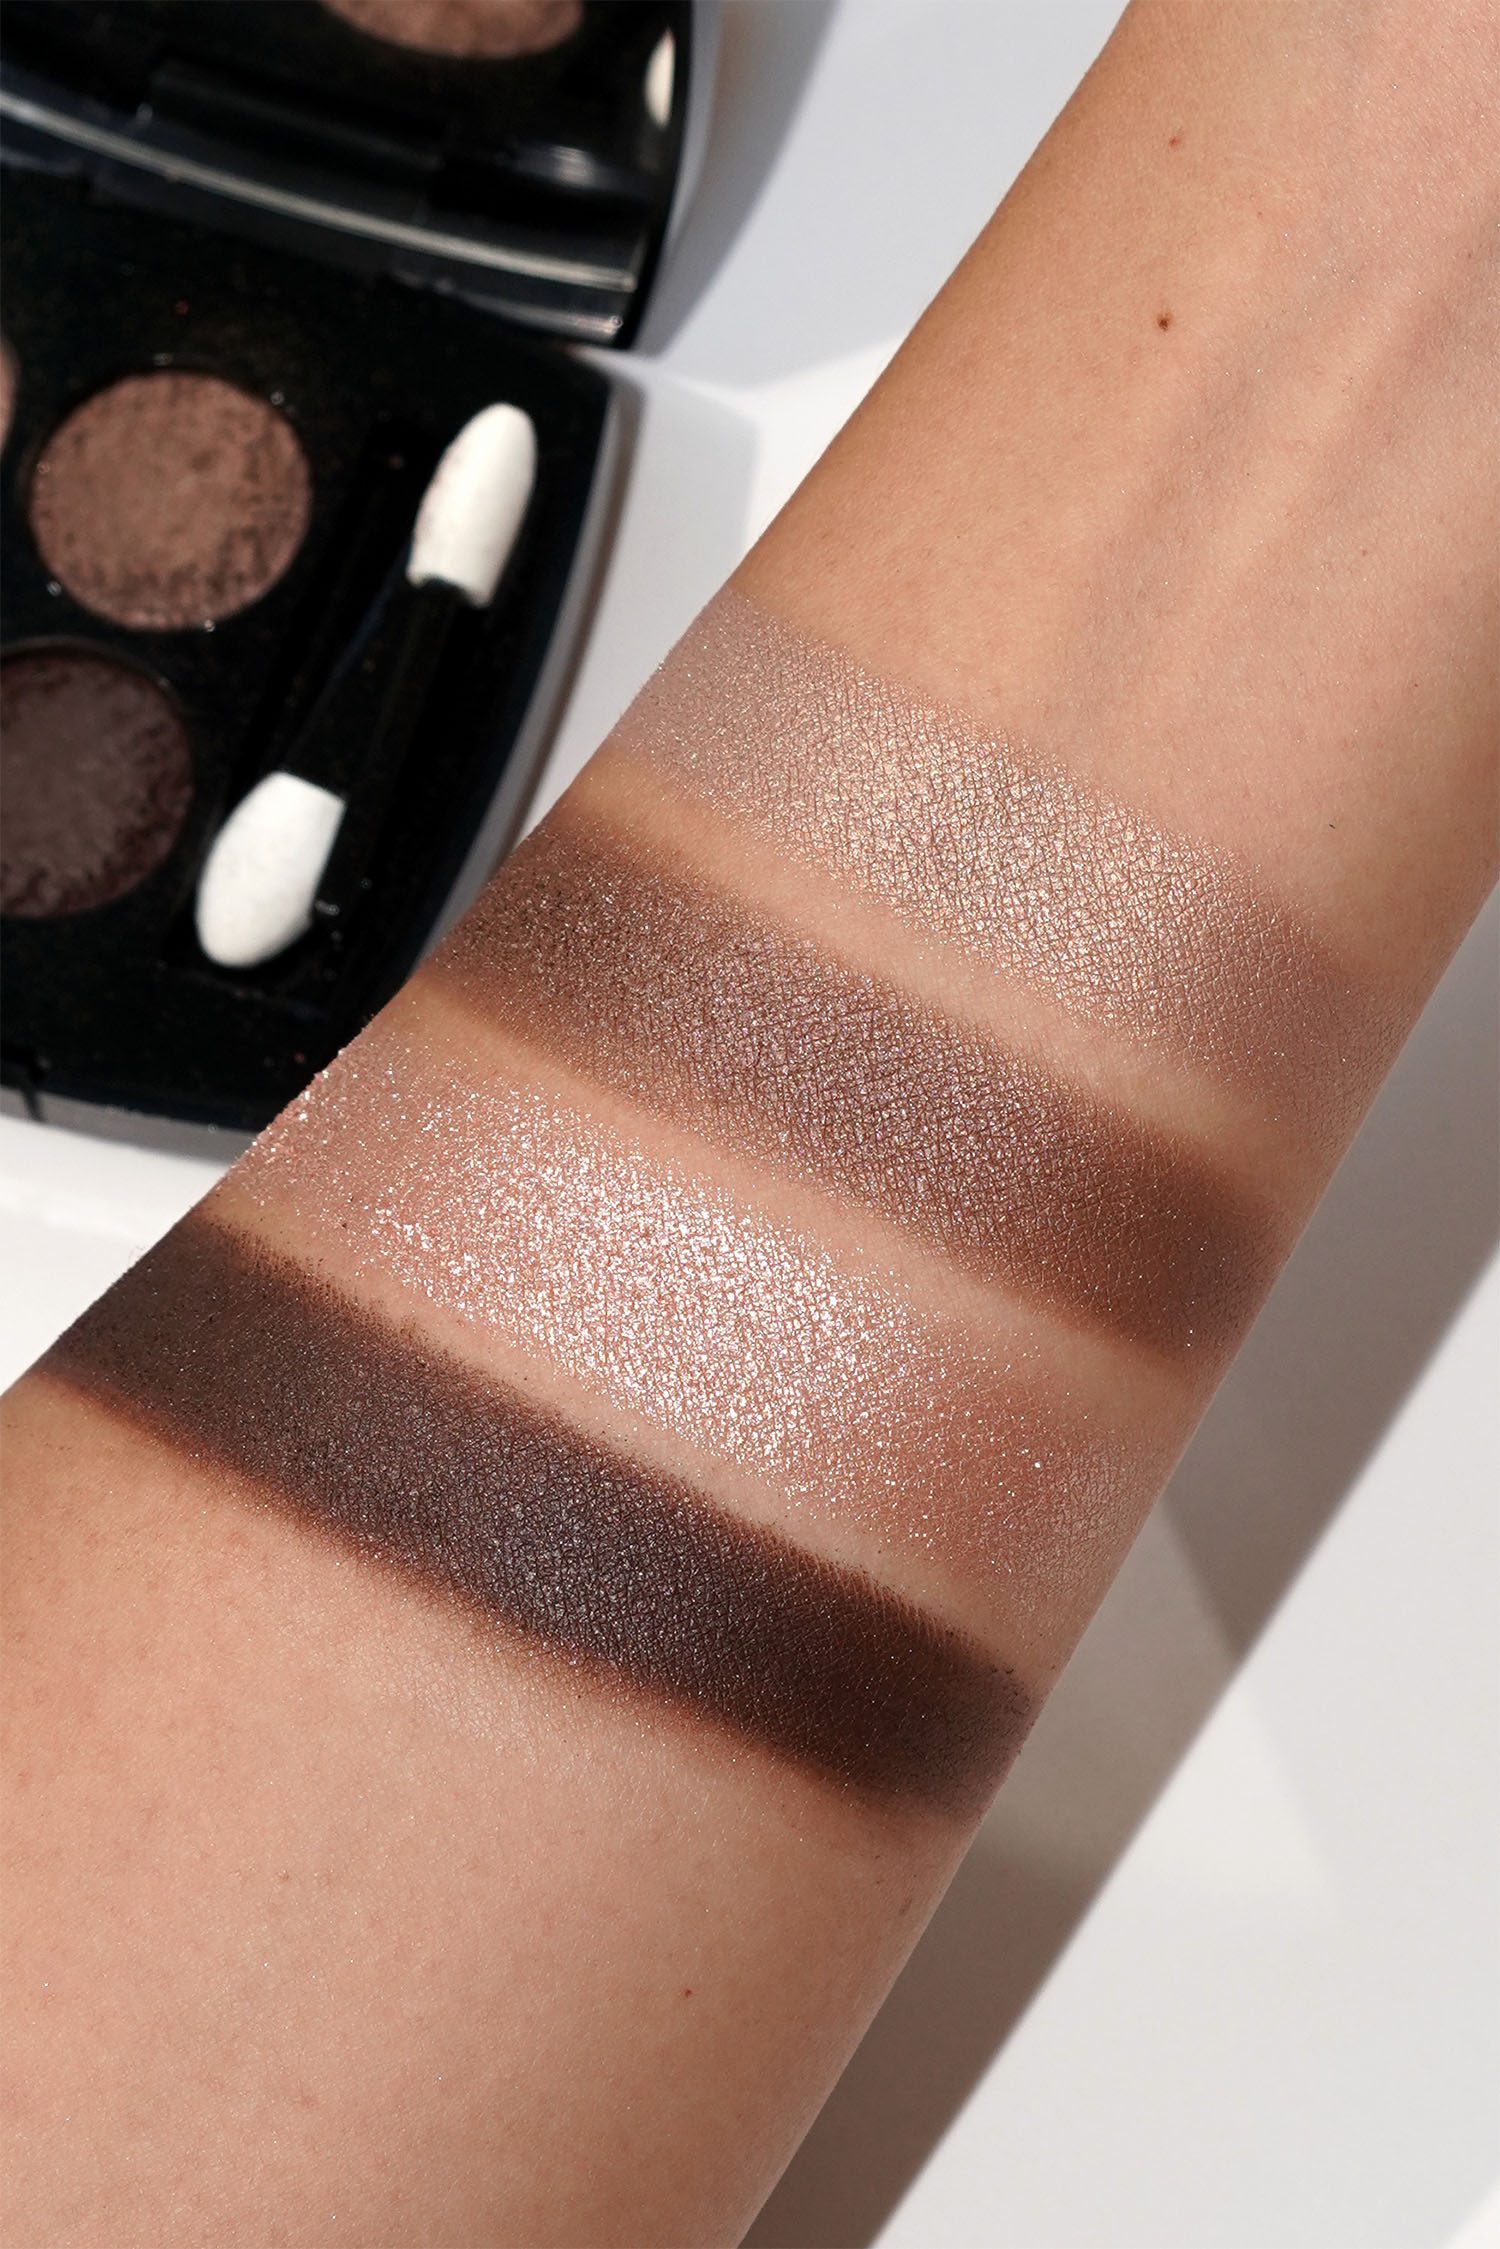 Encommium hjul Indvandring New Chanel Les 4 Ombres Tweed Eyeshadows - The Beauty Look Book